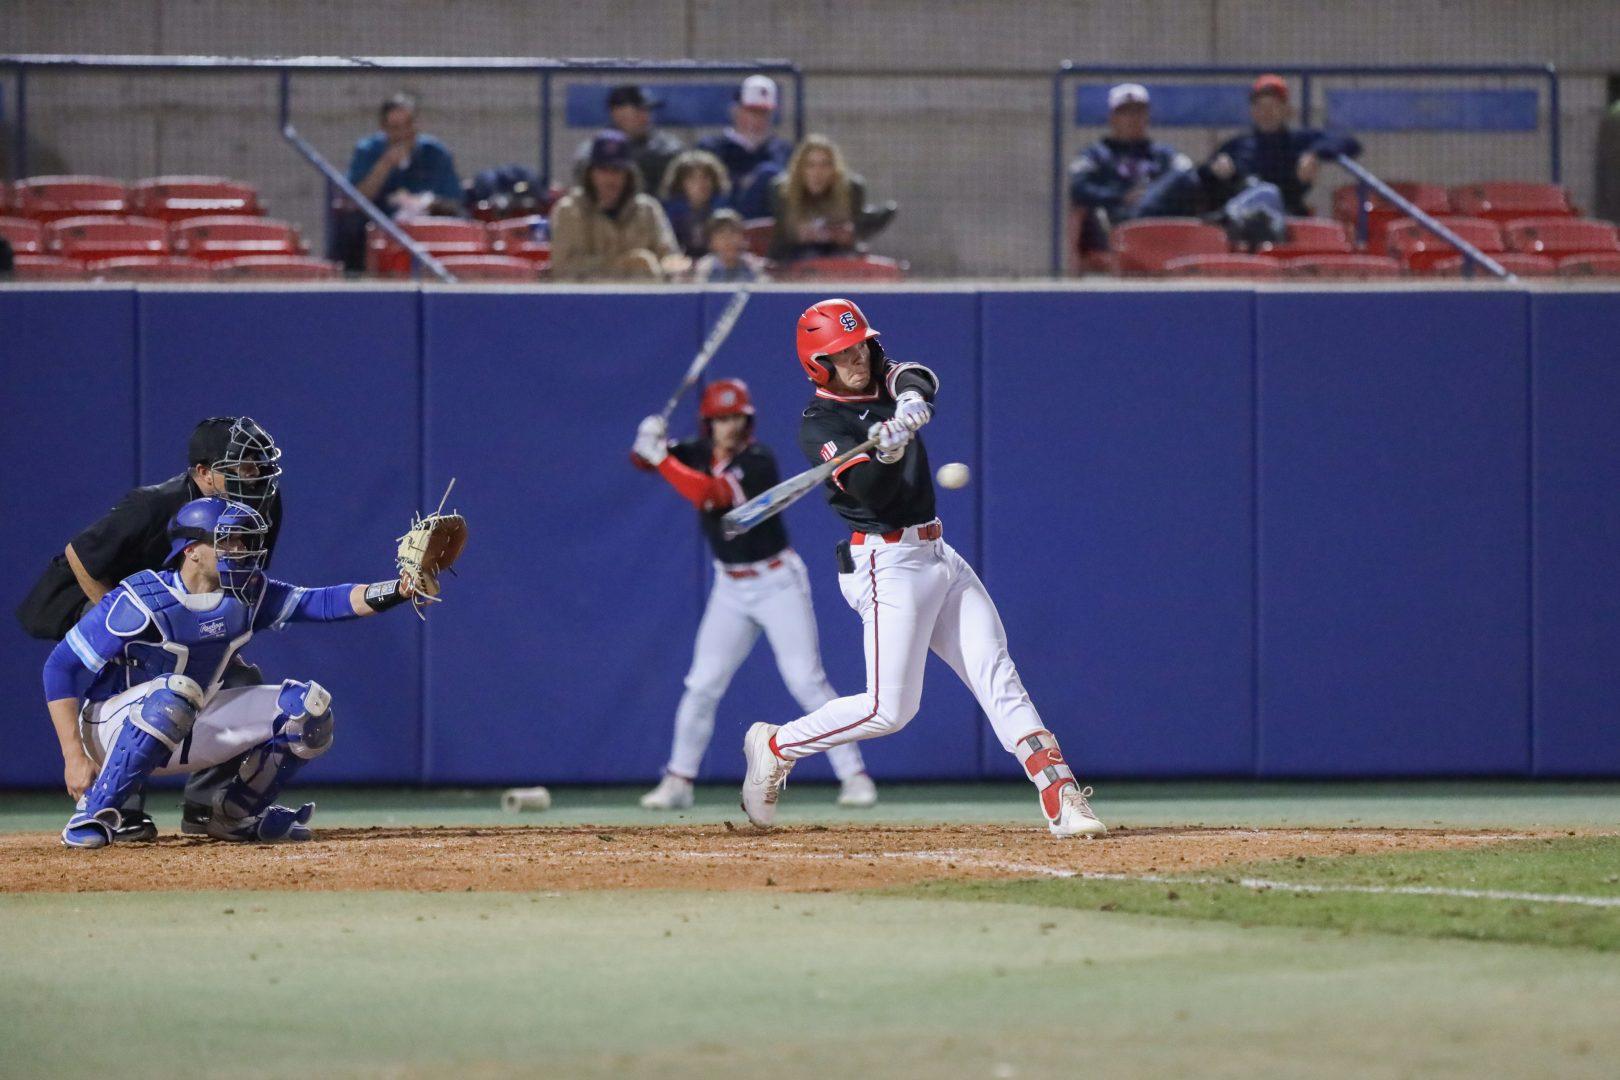 Infielder Ryan Higgins hits a home run in the bottom of the second against Seton Hall at Bob Bennett Stadium on Tuesday, March 3, 2020. (Vendila Yang/ The Collegian)